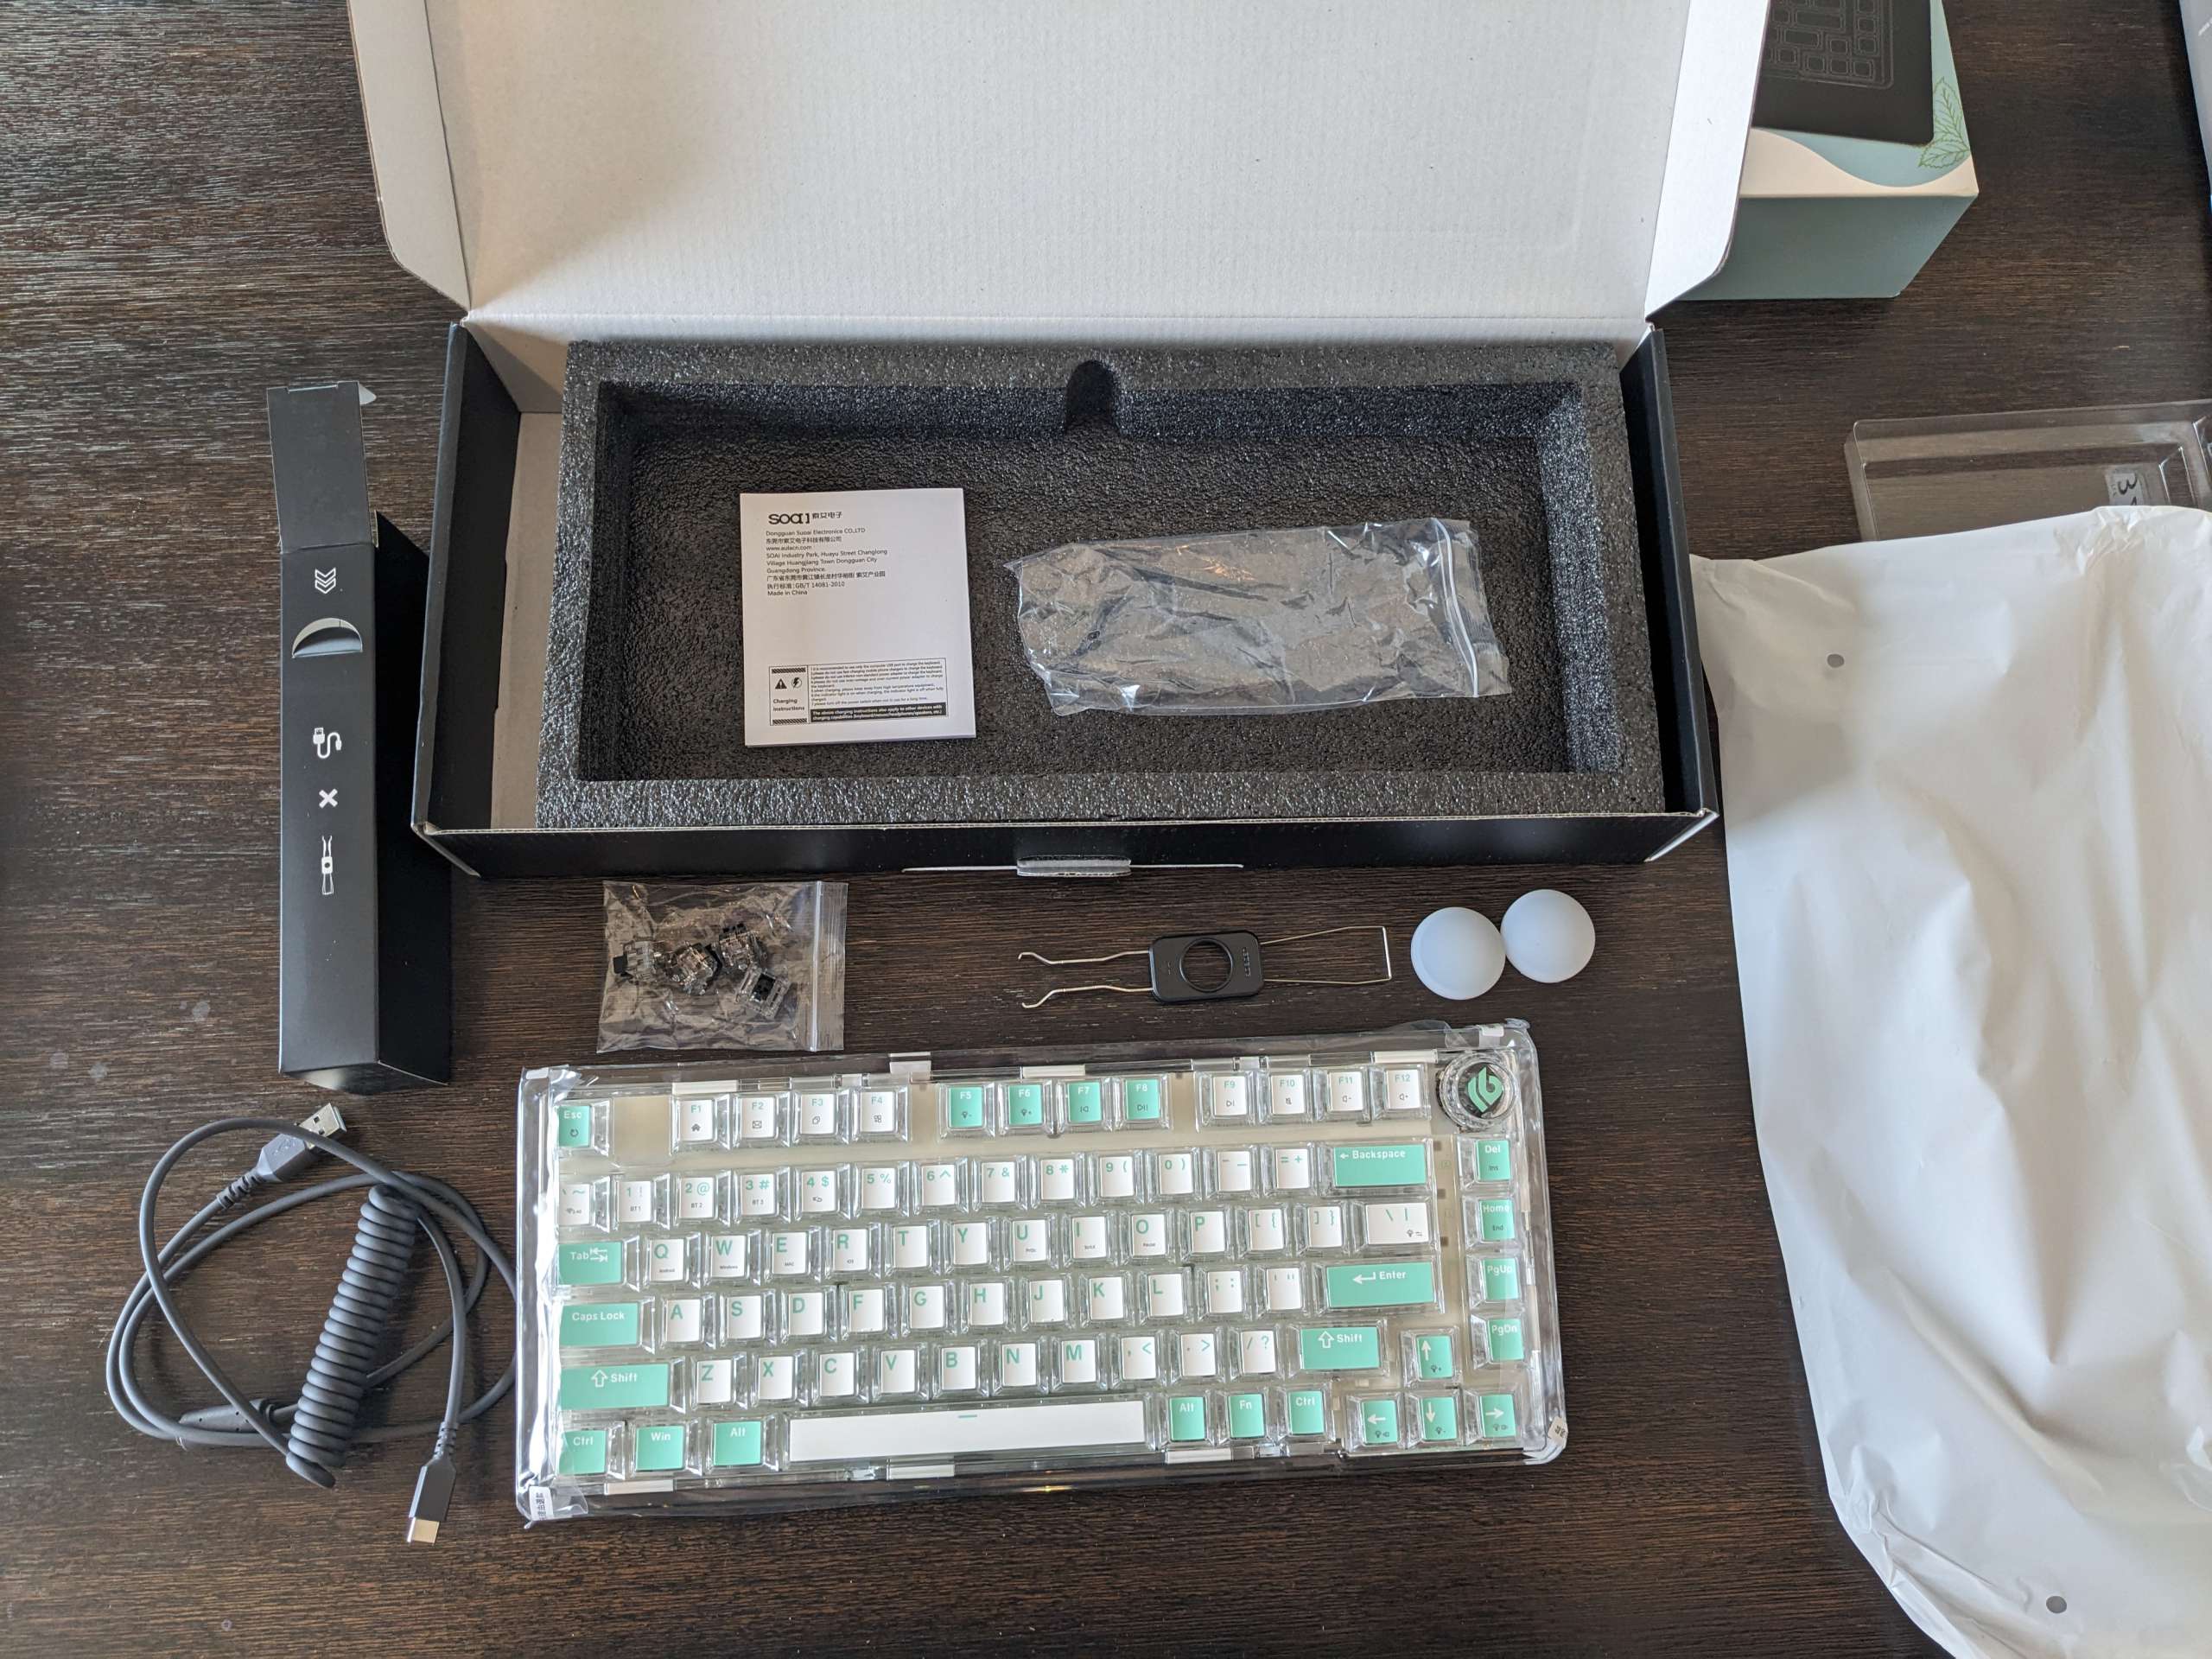 Unboxed keyboard with accessories unboxed